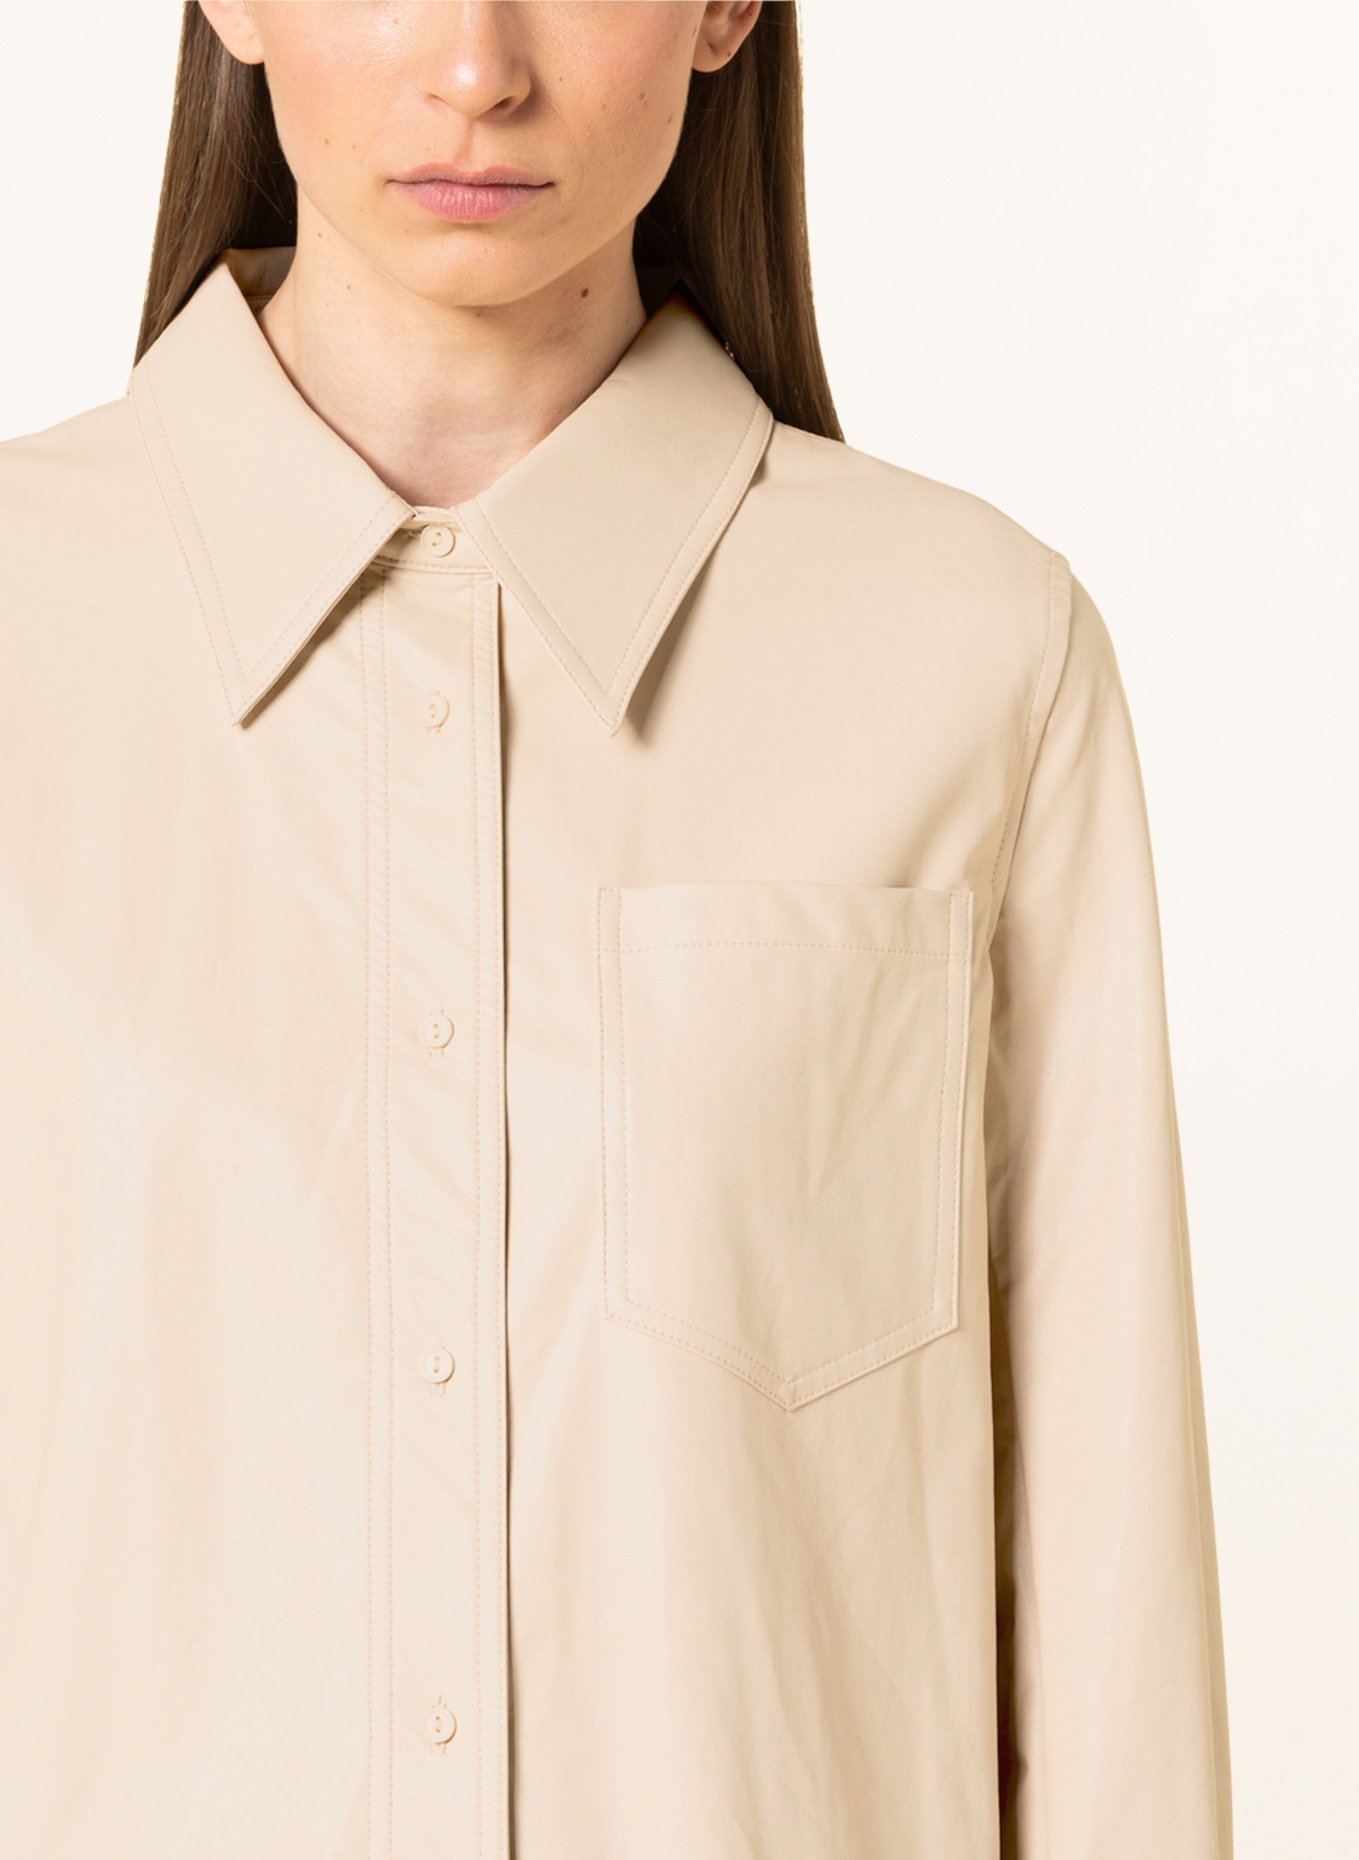 STAND STUDIO Shirt blouse MARITA in leather look, Color: BEIGE (Image 4)